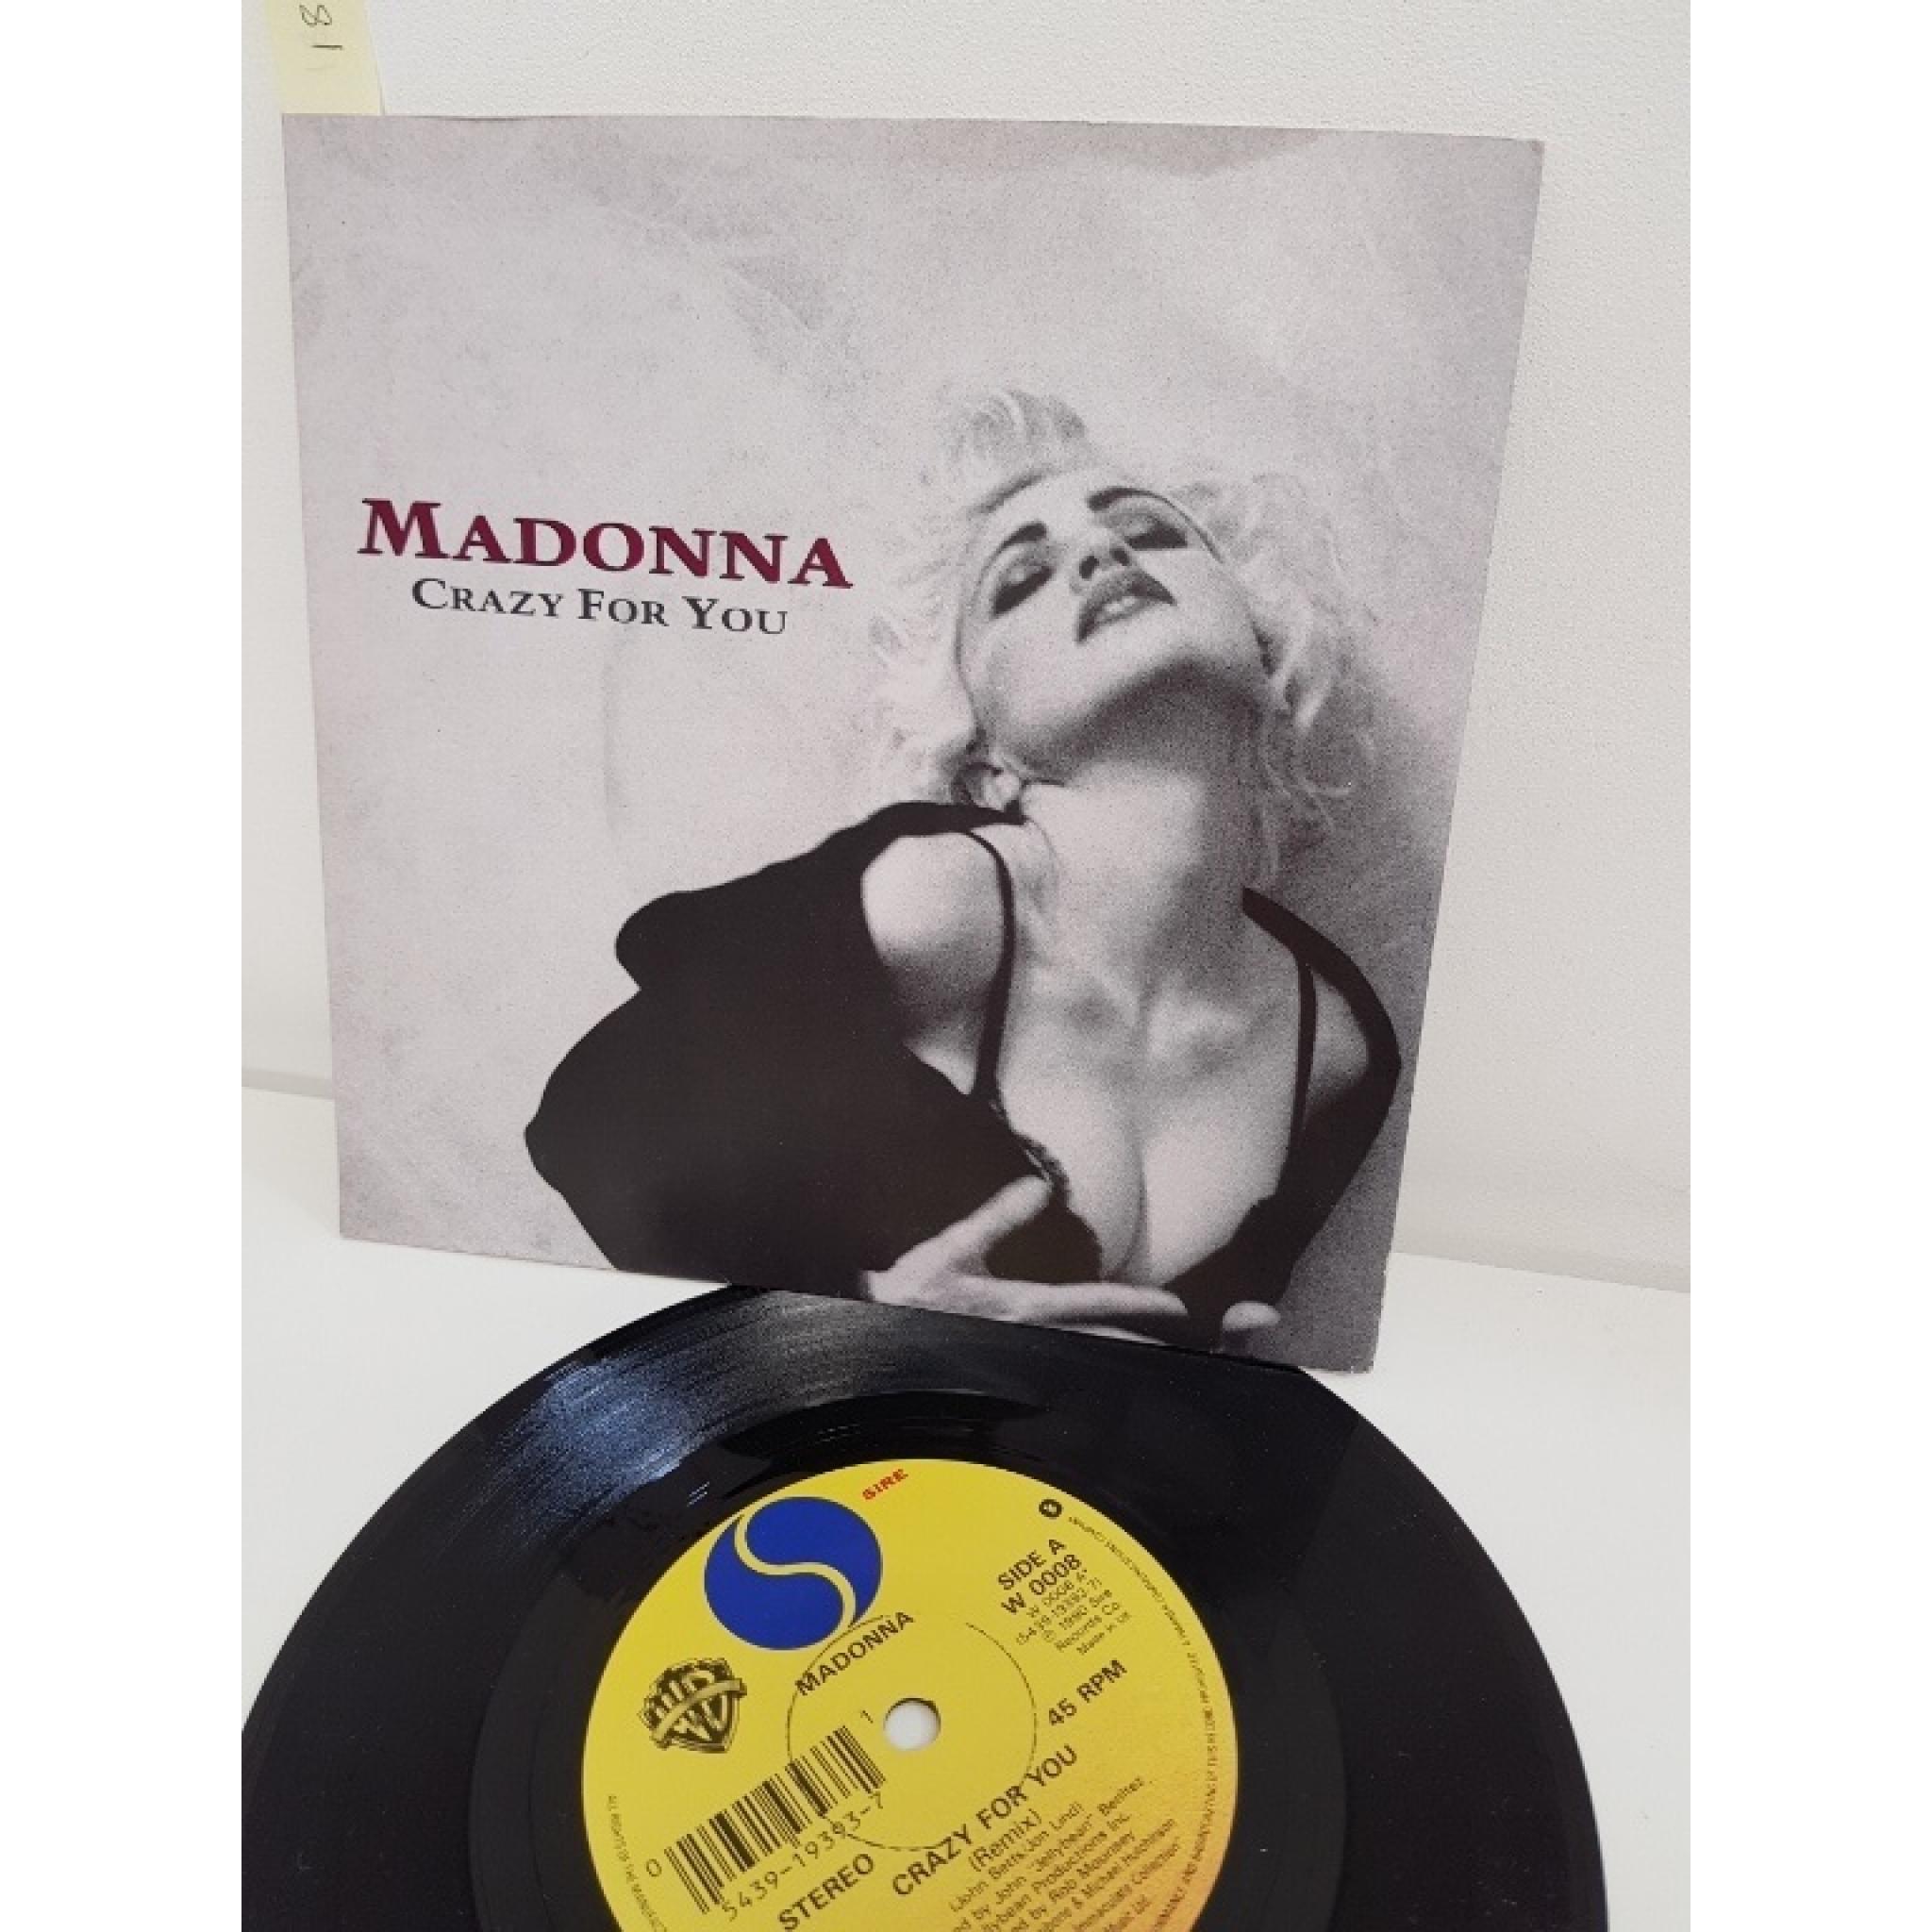 Madonna Crazy For You Side B Keep It Together W 0008 7 Single